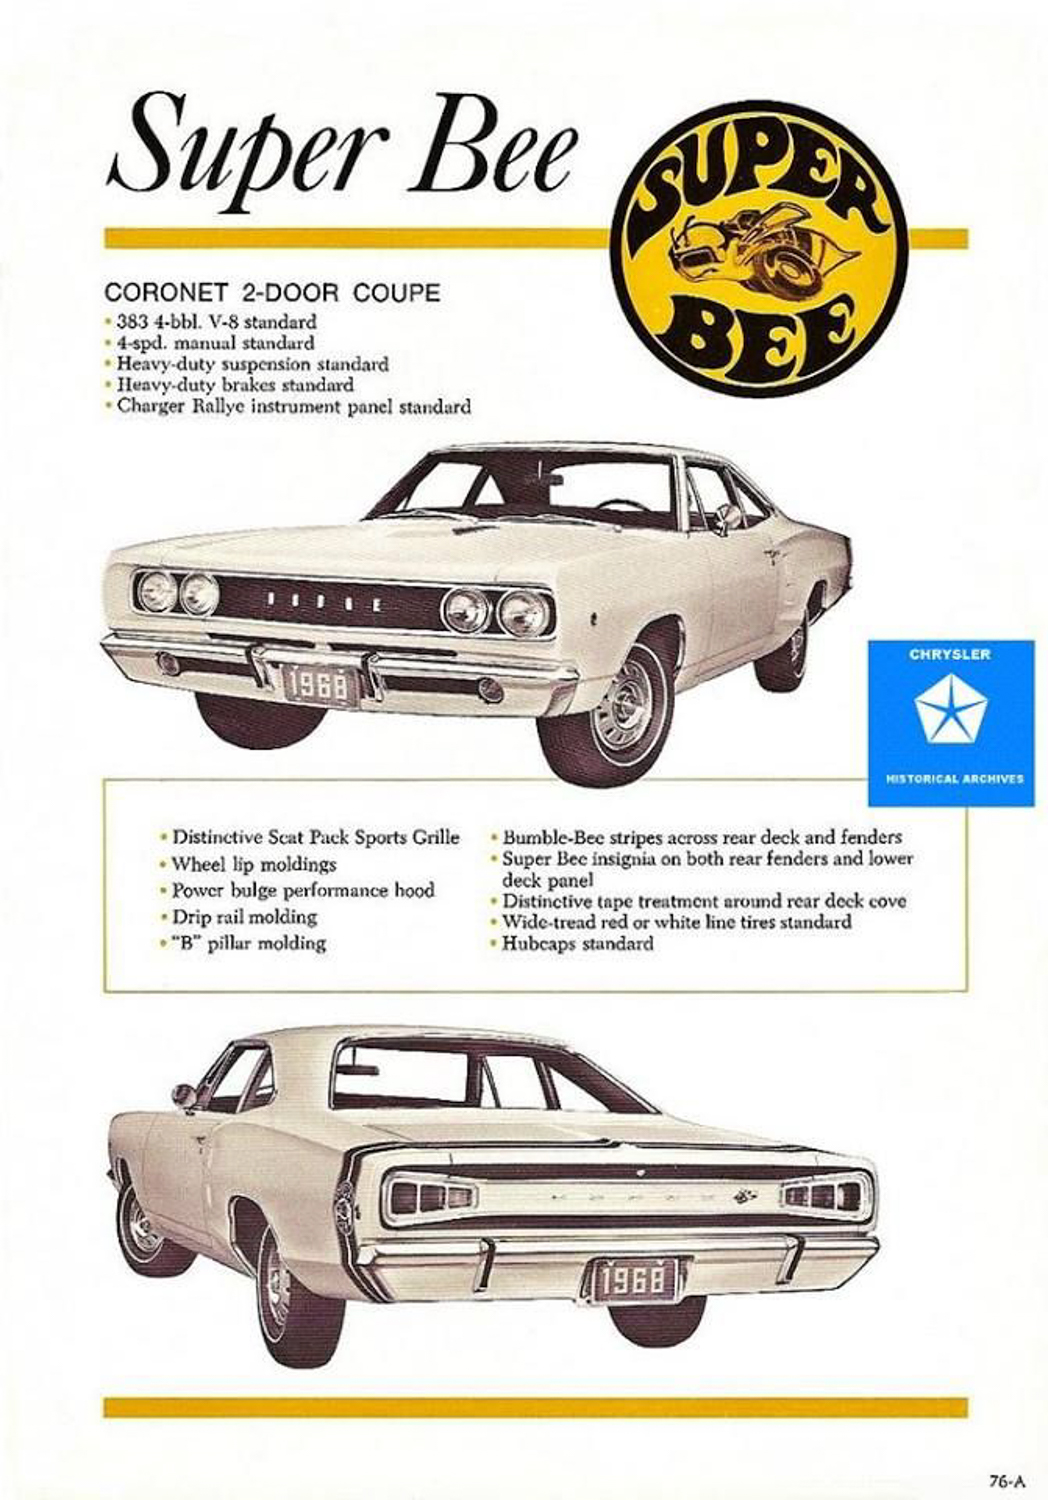 The 1960s saw manufacturers pursue the youth market with muscle cars. Chrysler built cars for its "Scat Pack," that included cars like the Super Bee. 